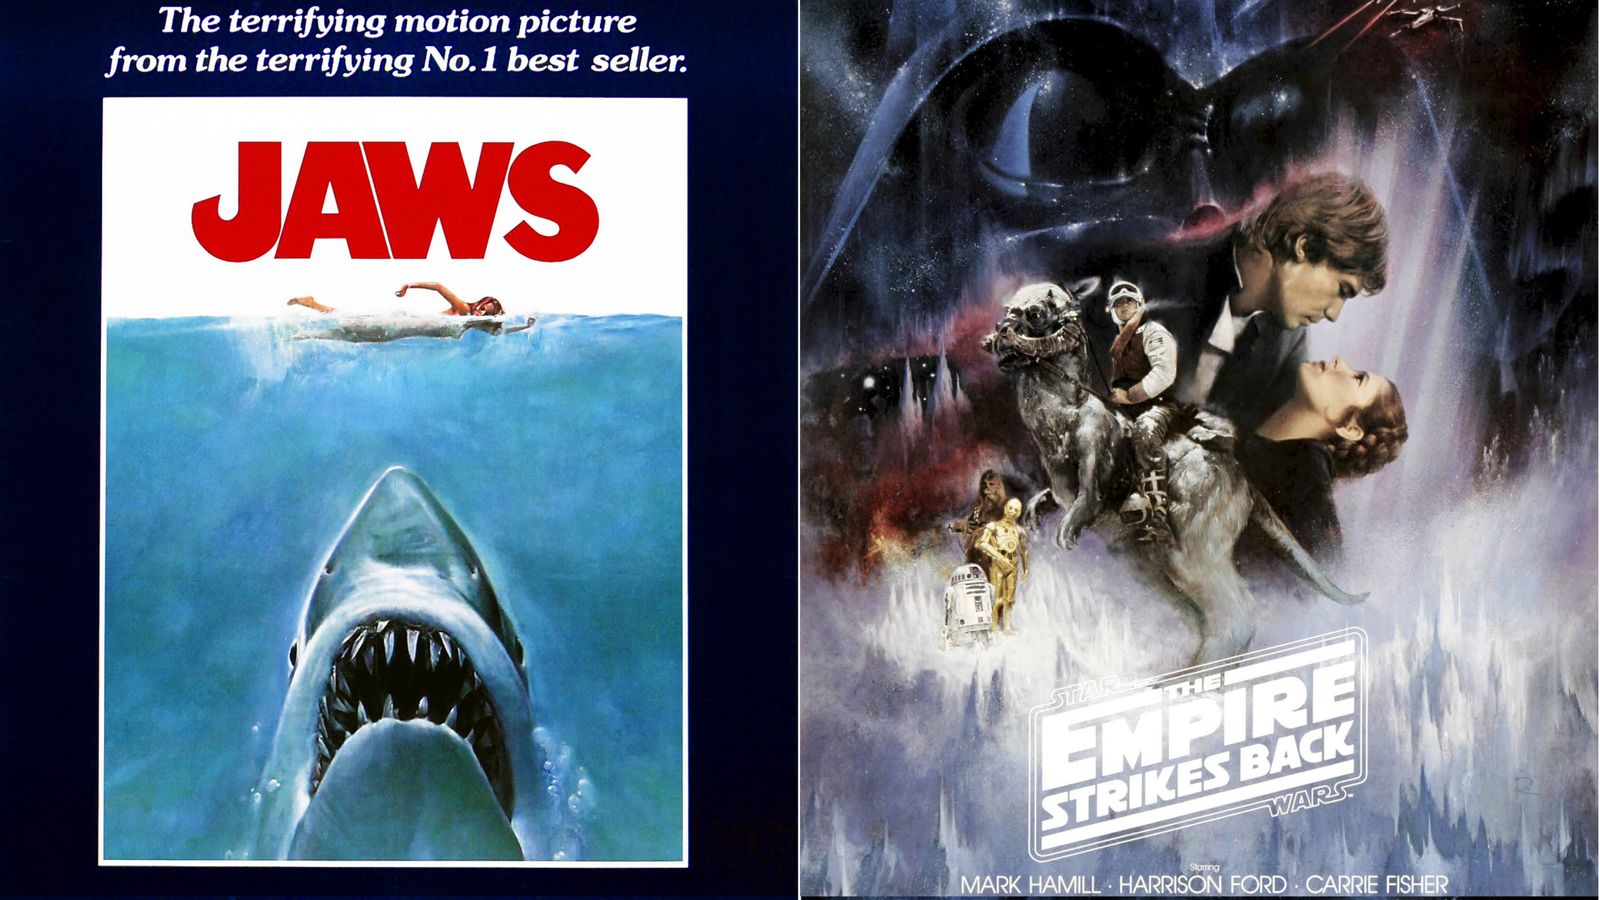 Jaws and Empire Strikes Back poster artist Roger Kastel dies at 92